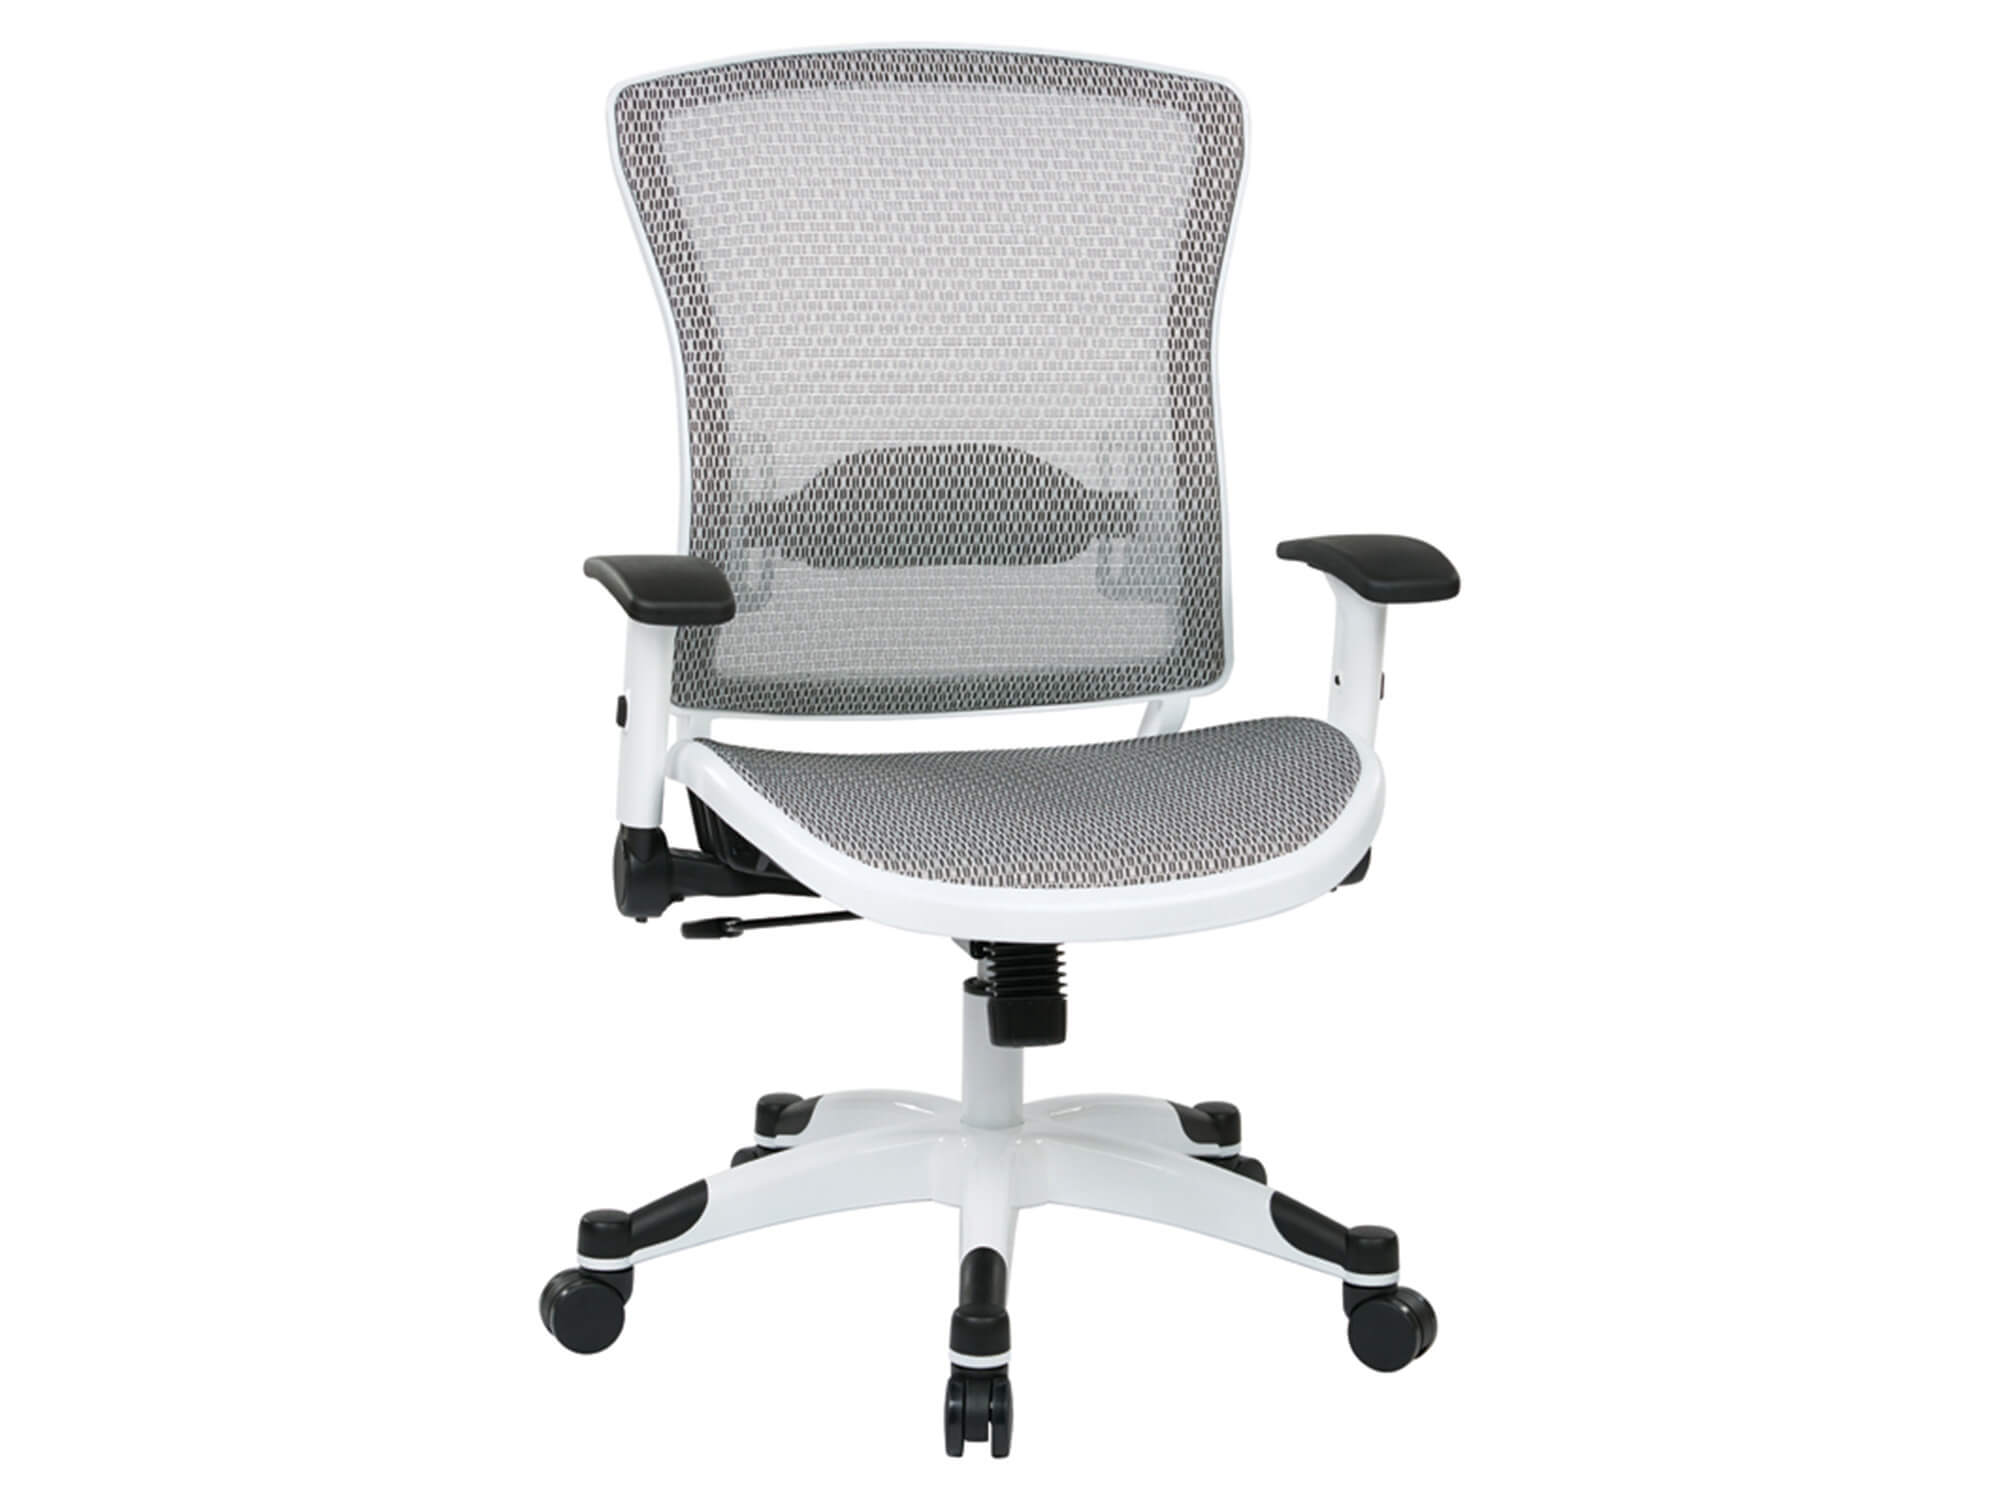 chairs-for-office-ergonomic-chair.jpg